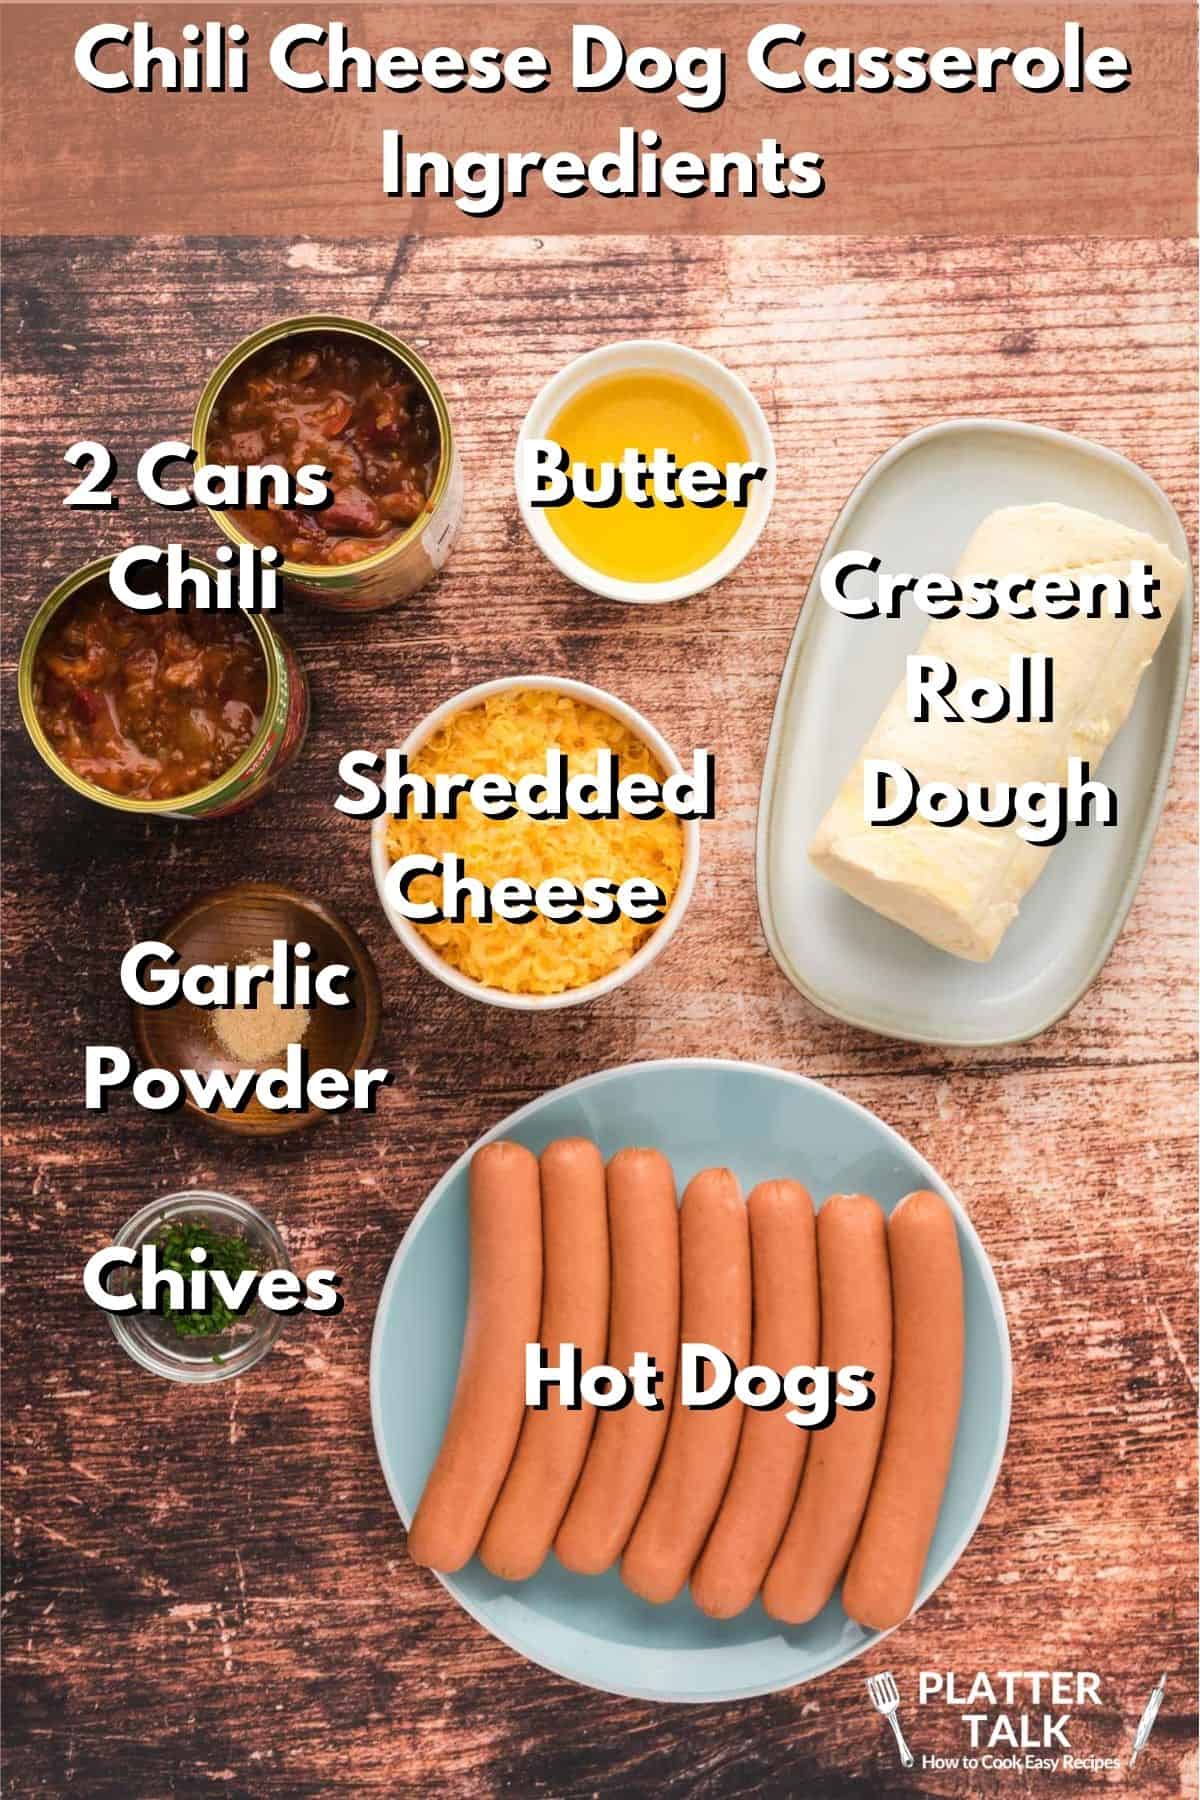 A bunch of hot dogs and other ingredients.